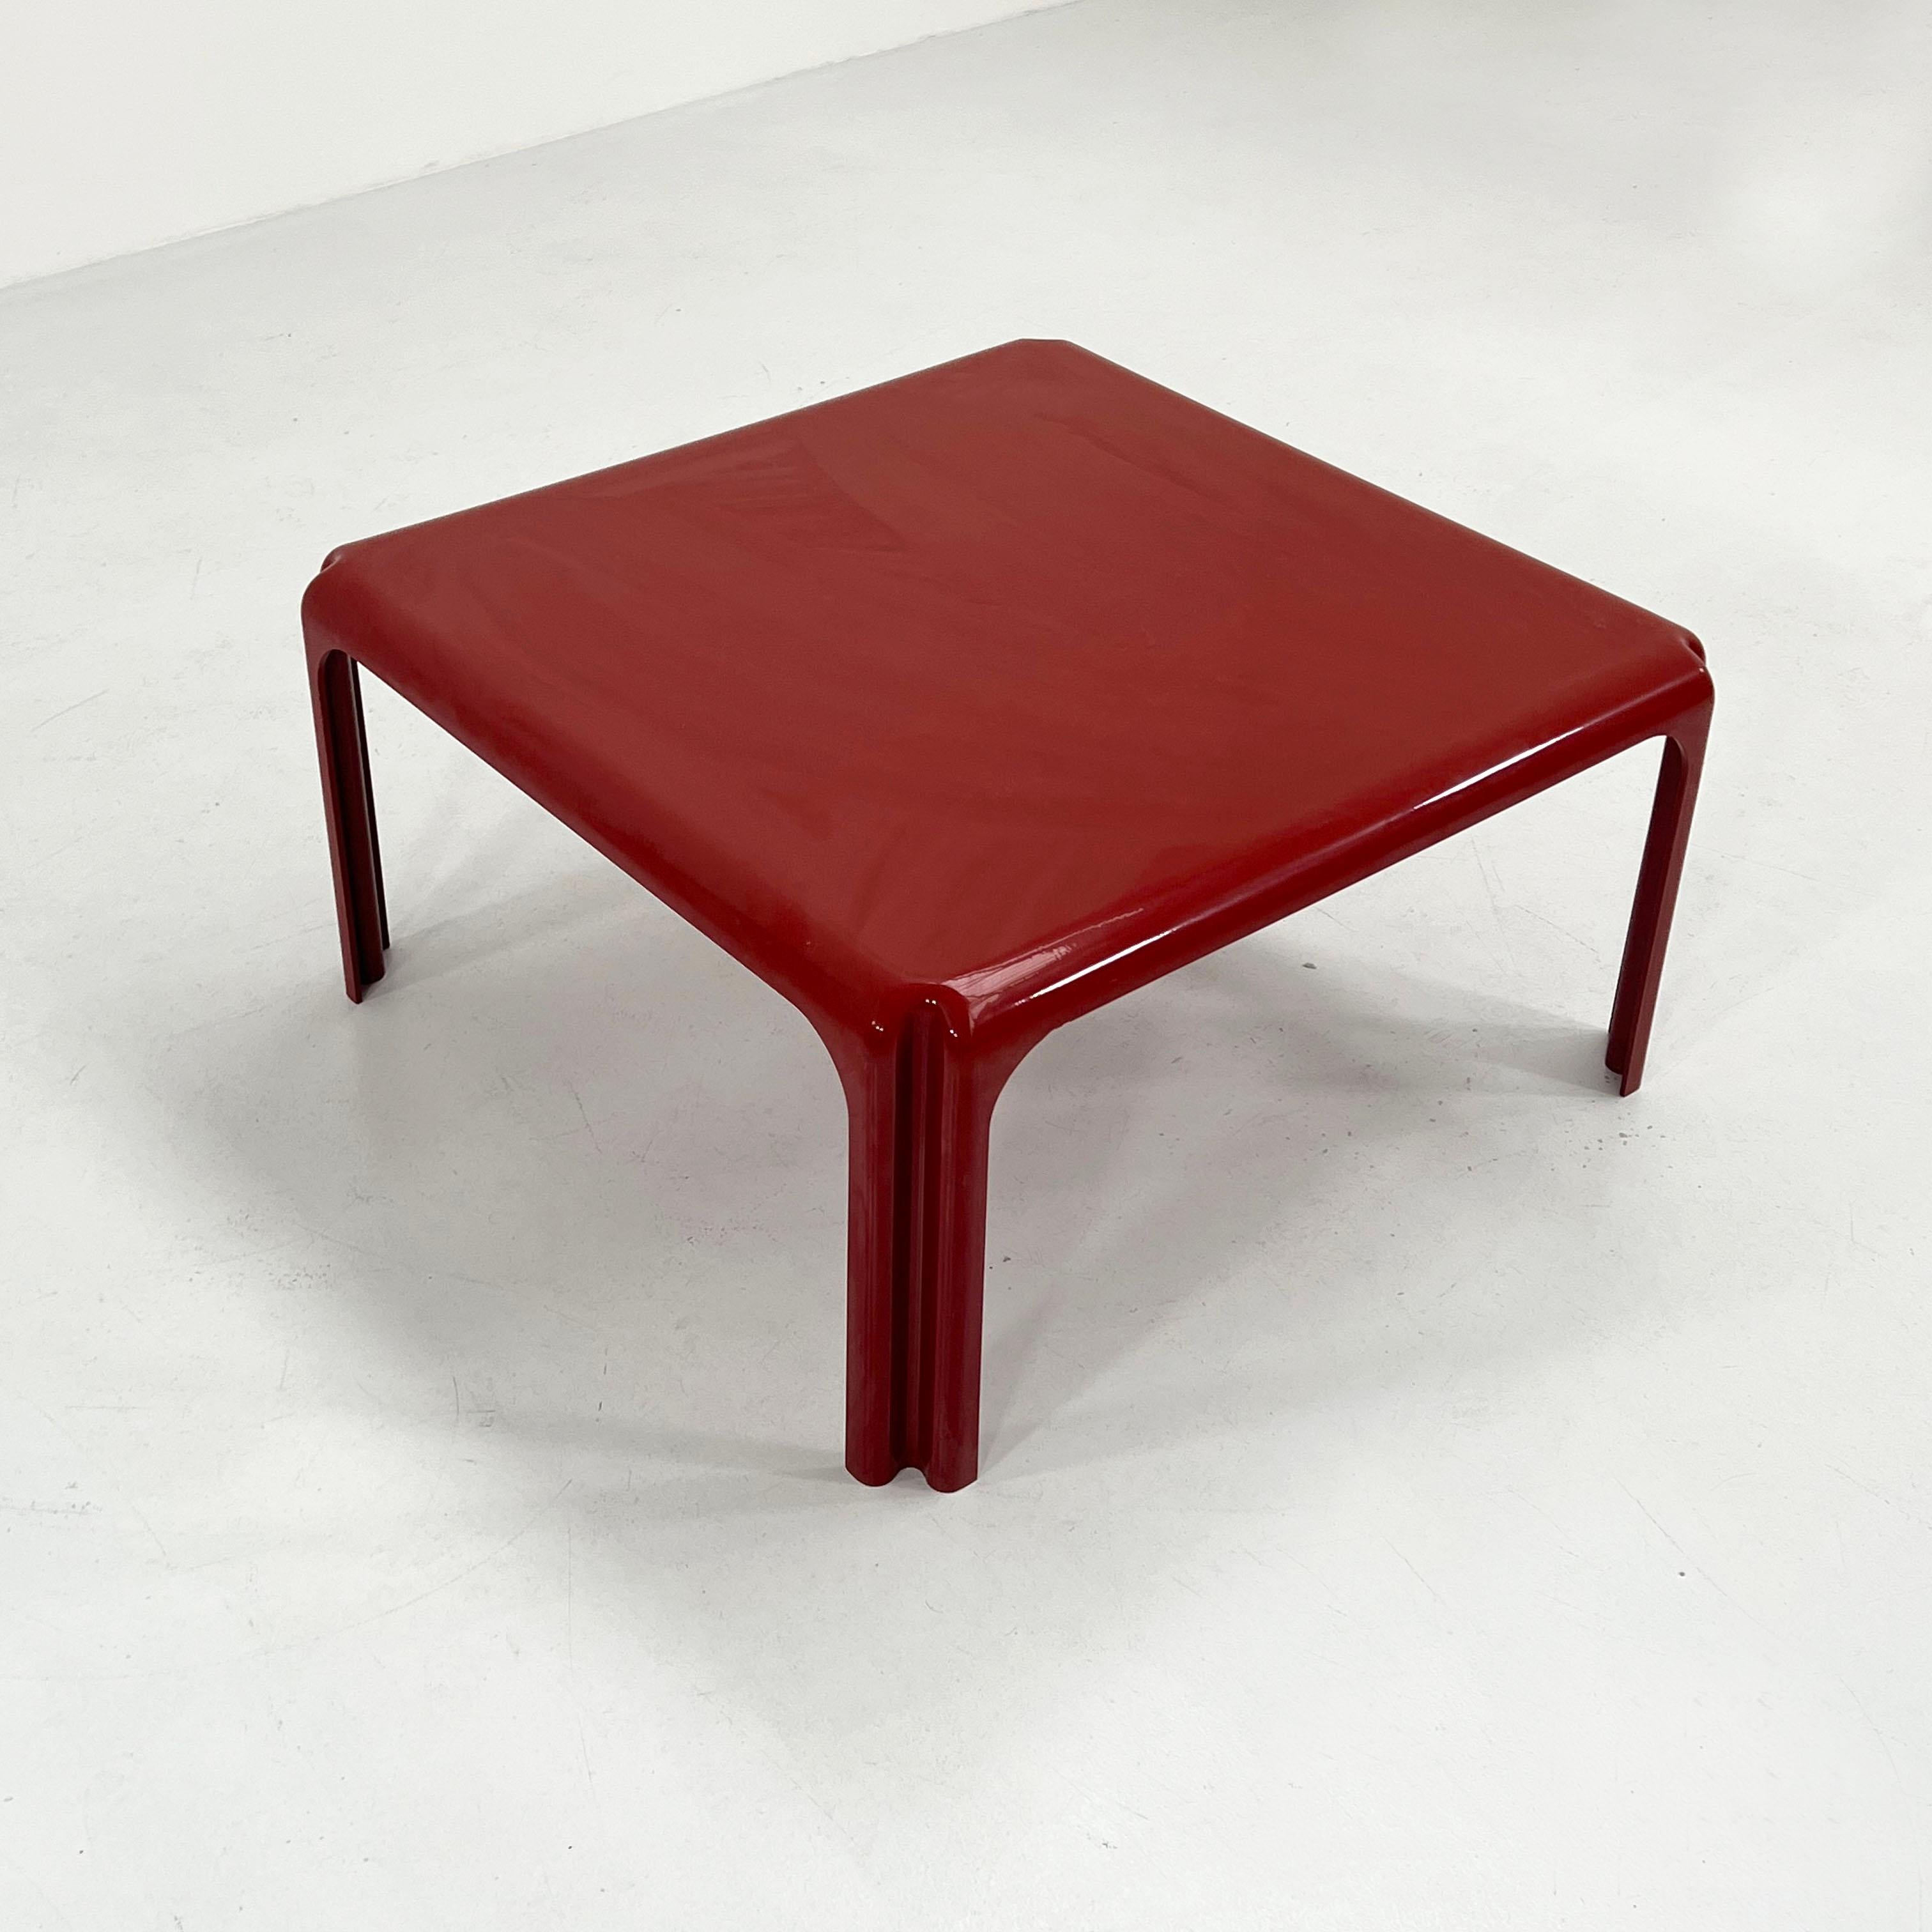 Designer - Vico Magistretti
Producer - Artemide
Model - Arcadia 80 Coffee Table 
Design Period - Seventies
Measurements - Width 80 cm x Depth 80 cm x Height 40 cm
Materials - Plastic
Color - Burgundy
Light wear consistent with age and use.